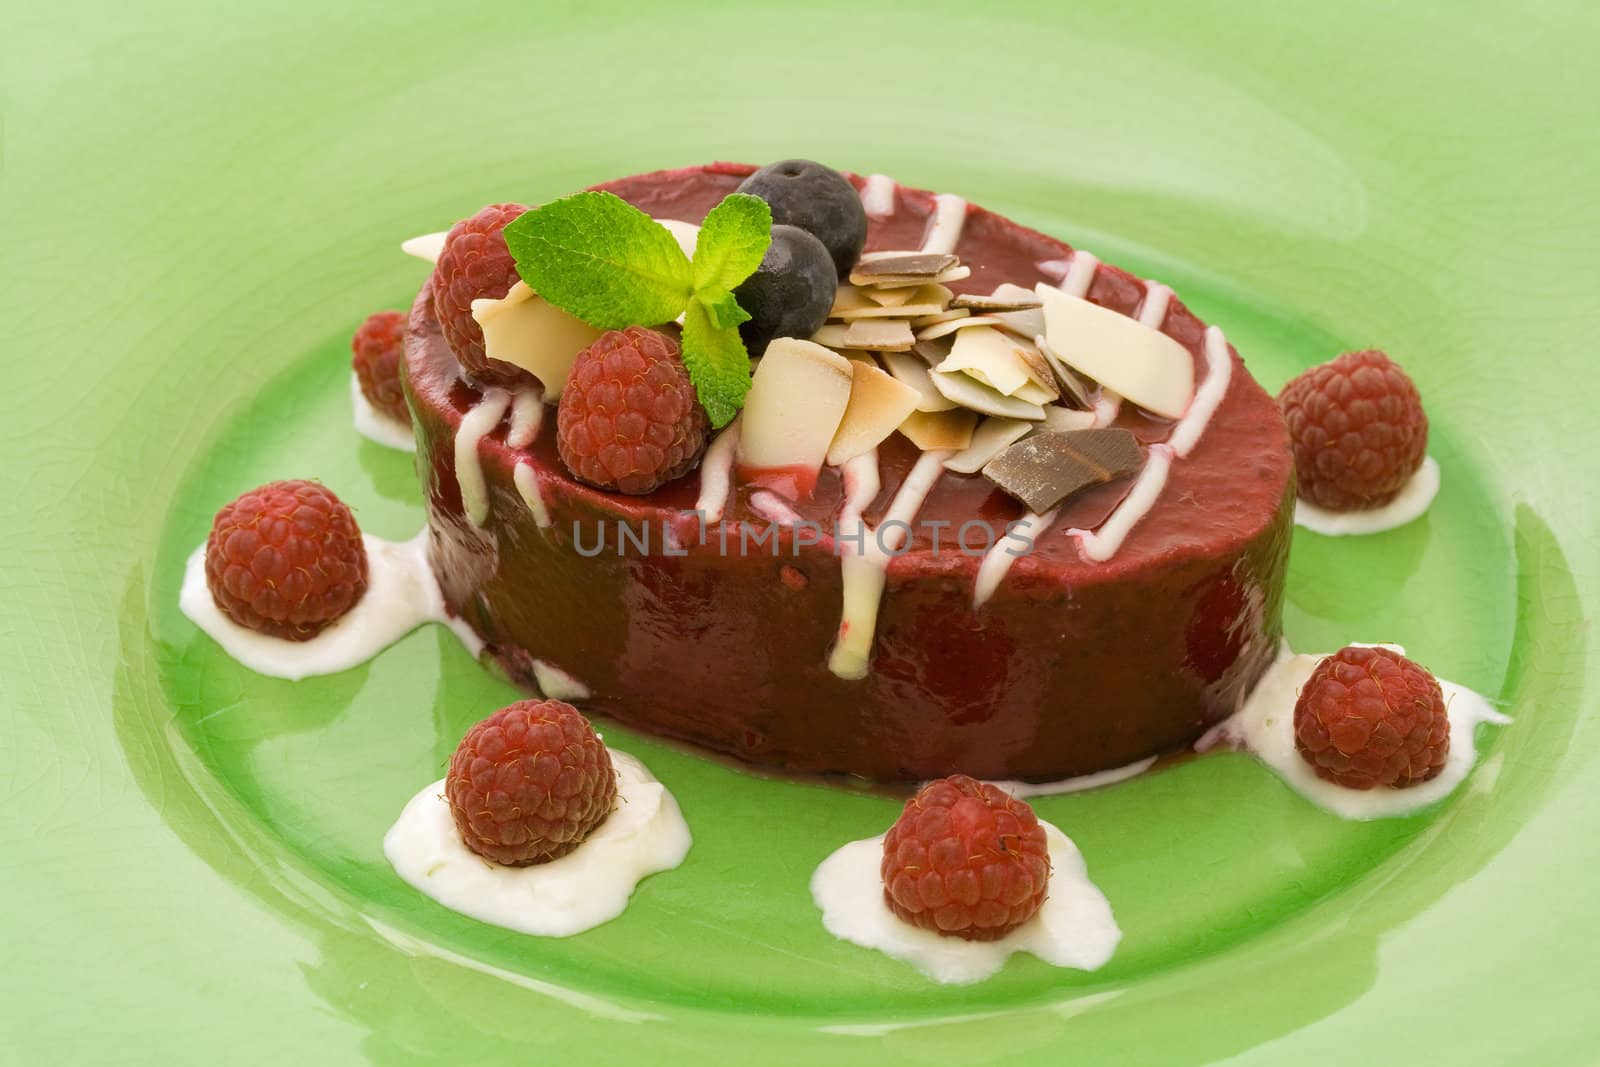 Raspberry mousse cake with whipped cream and fruits on a green plate